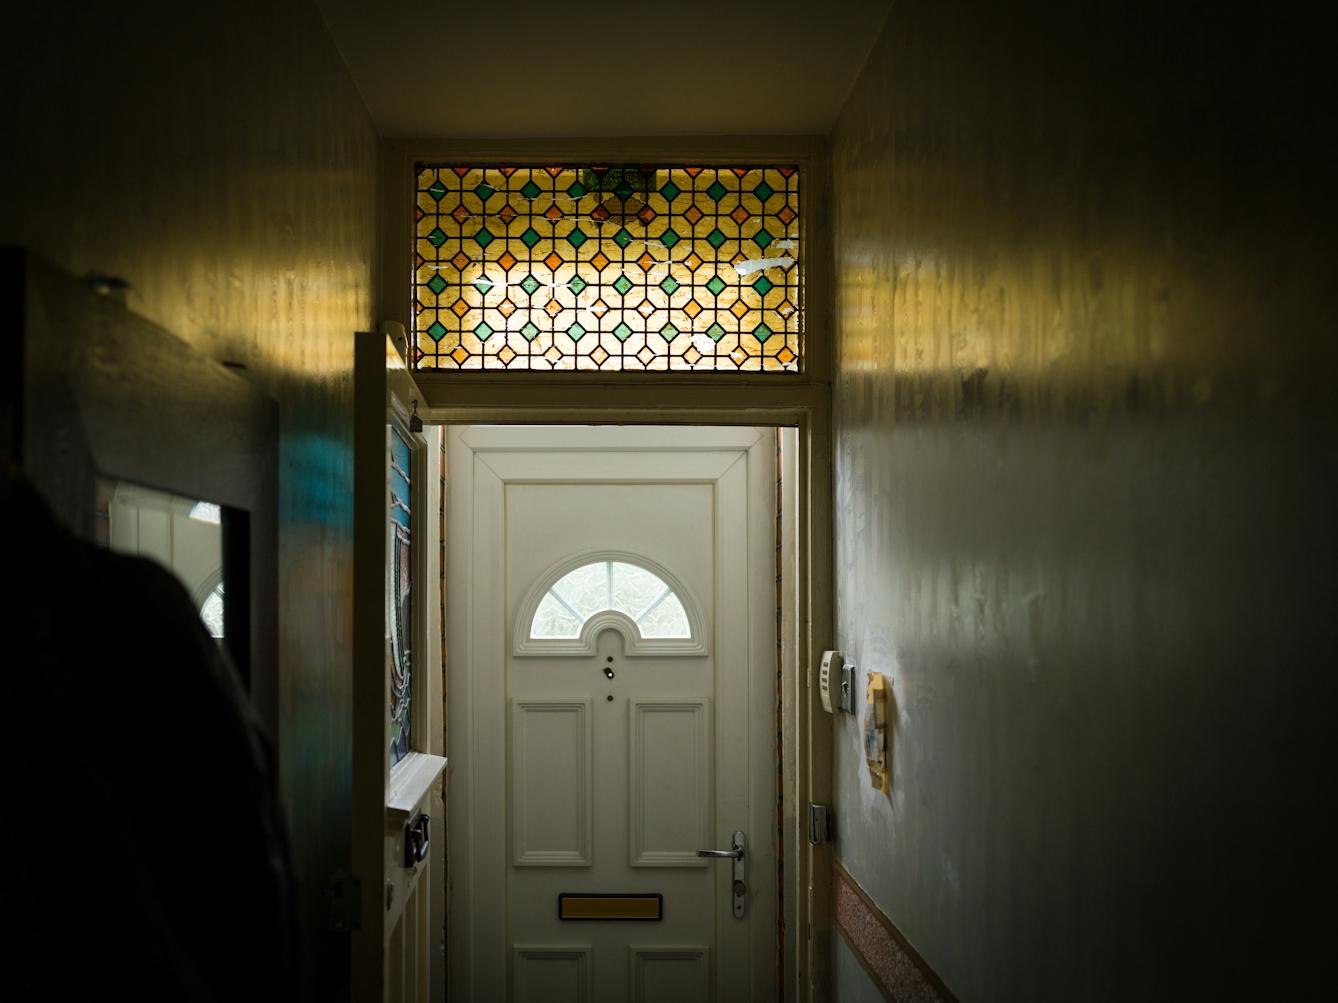 Photograph of Sarifa Patel's front door from inside her house.